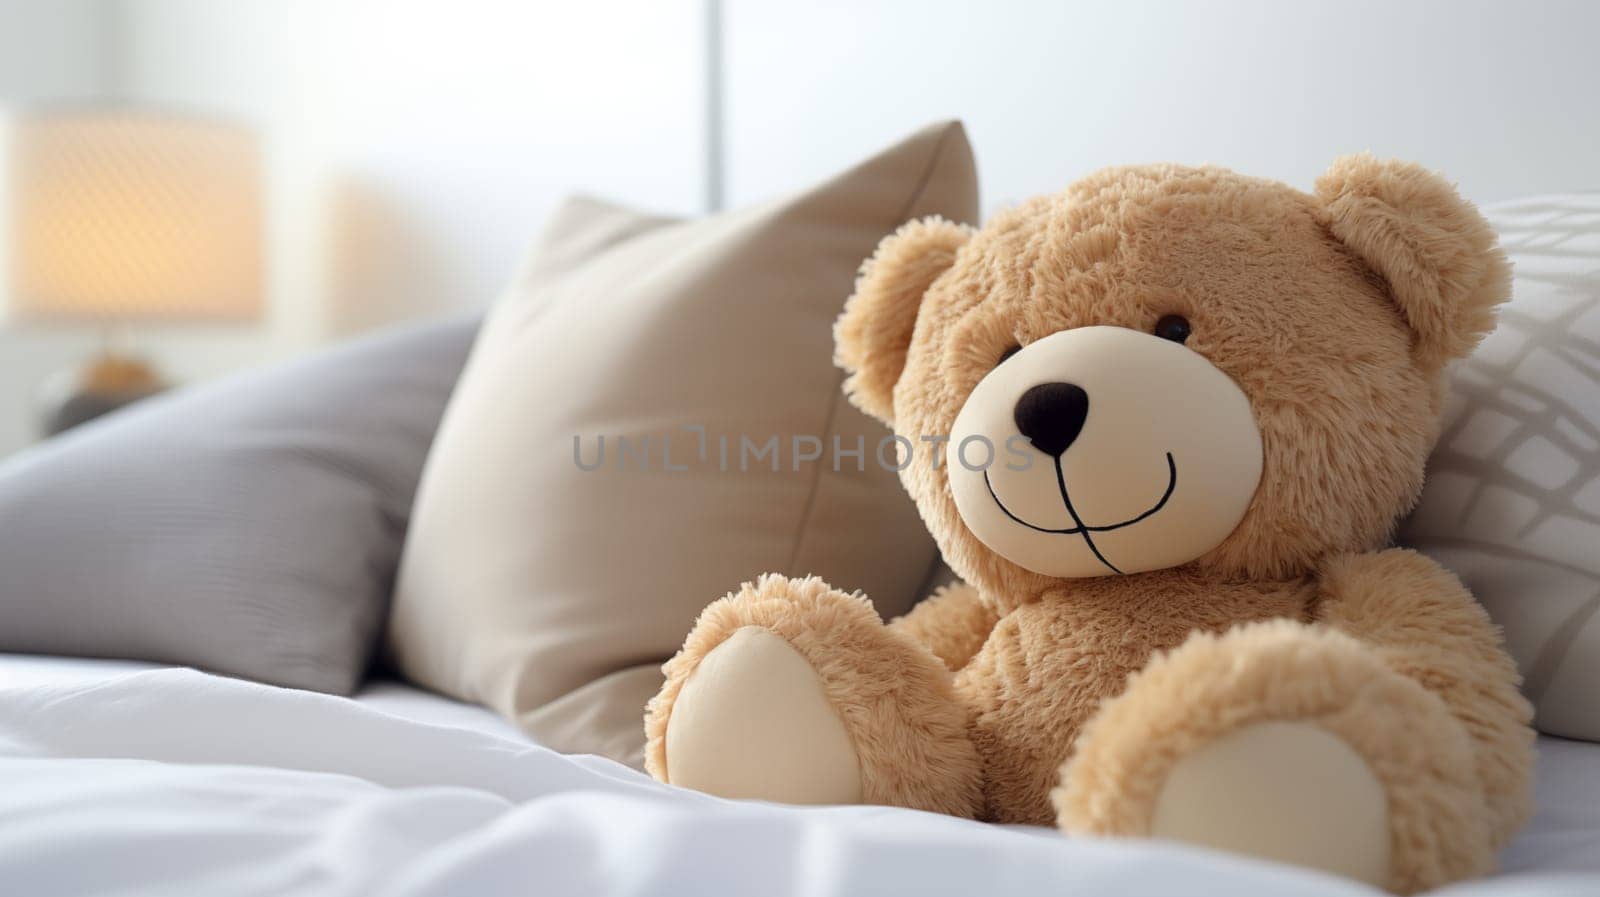 Adorable beige teddy bear, sitting in white bed, at daylight.